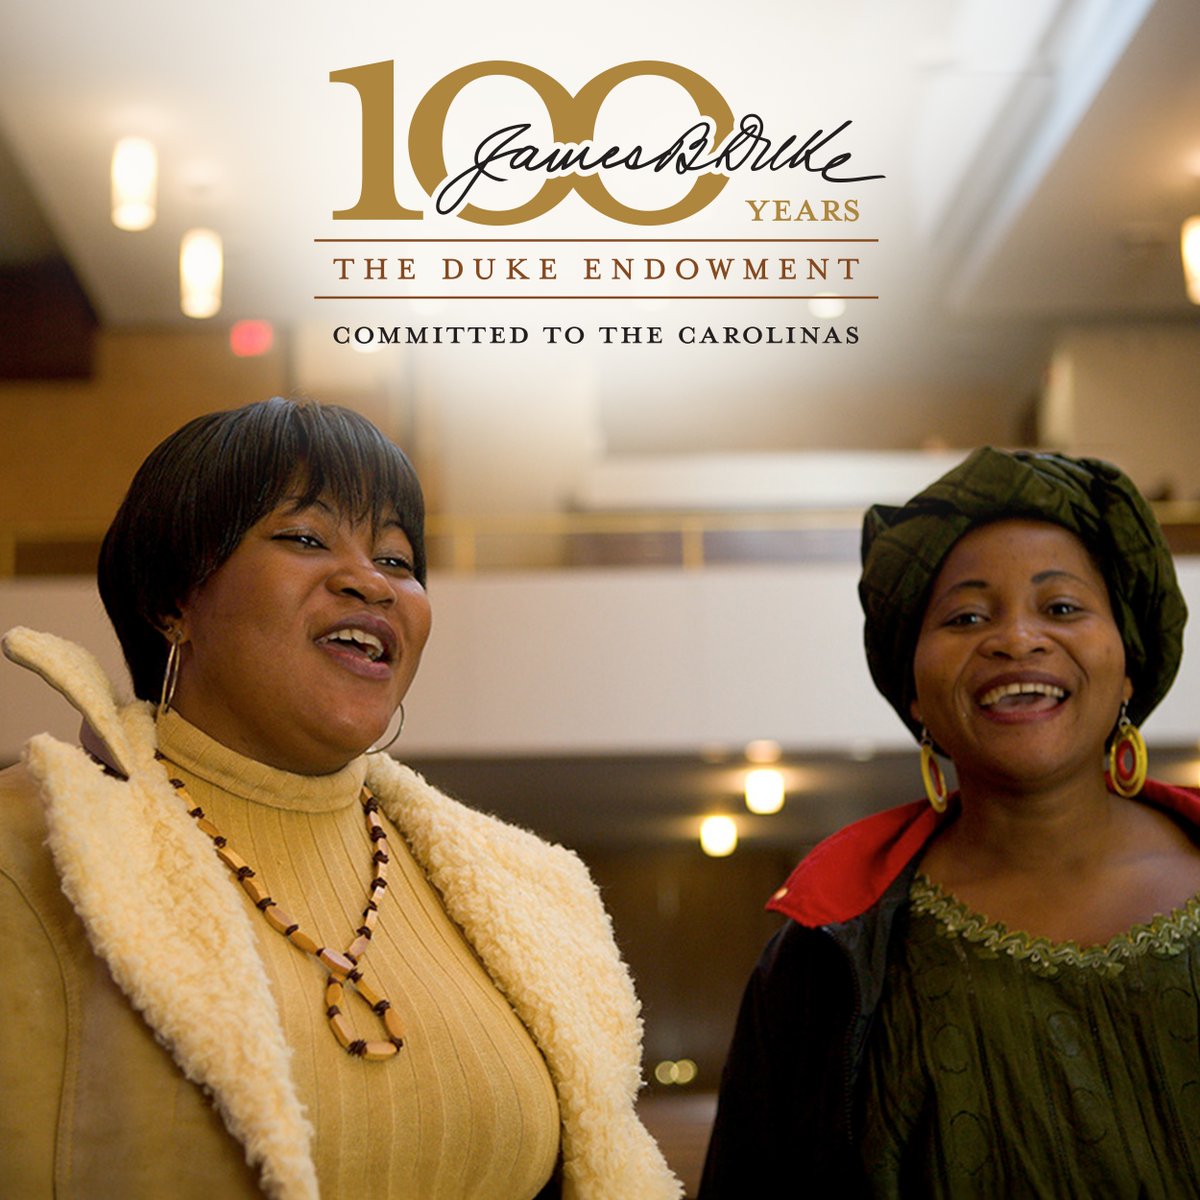 The Duke Endowment supports United Methodist churches in rural communities, empowering congregations to make lasting impacts. James B. Duke's vision of doing 'big things for God and humanity' inspires our work today. Learn more at bit.ly/3xTbIGo. #DukeEndowment100